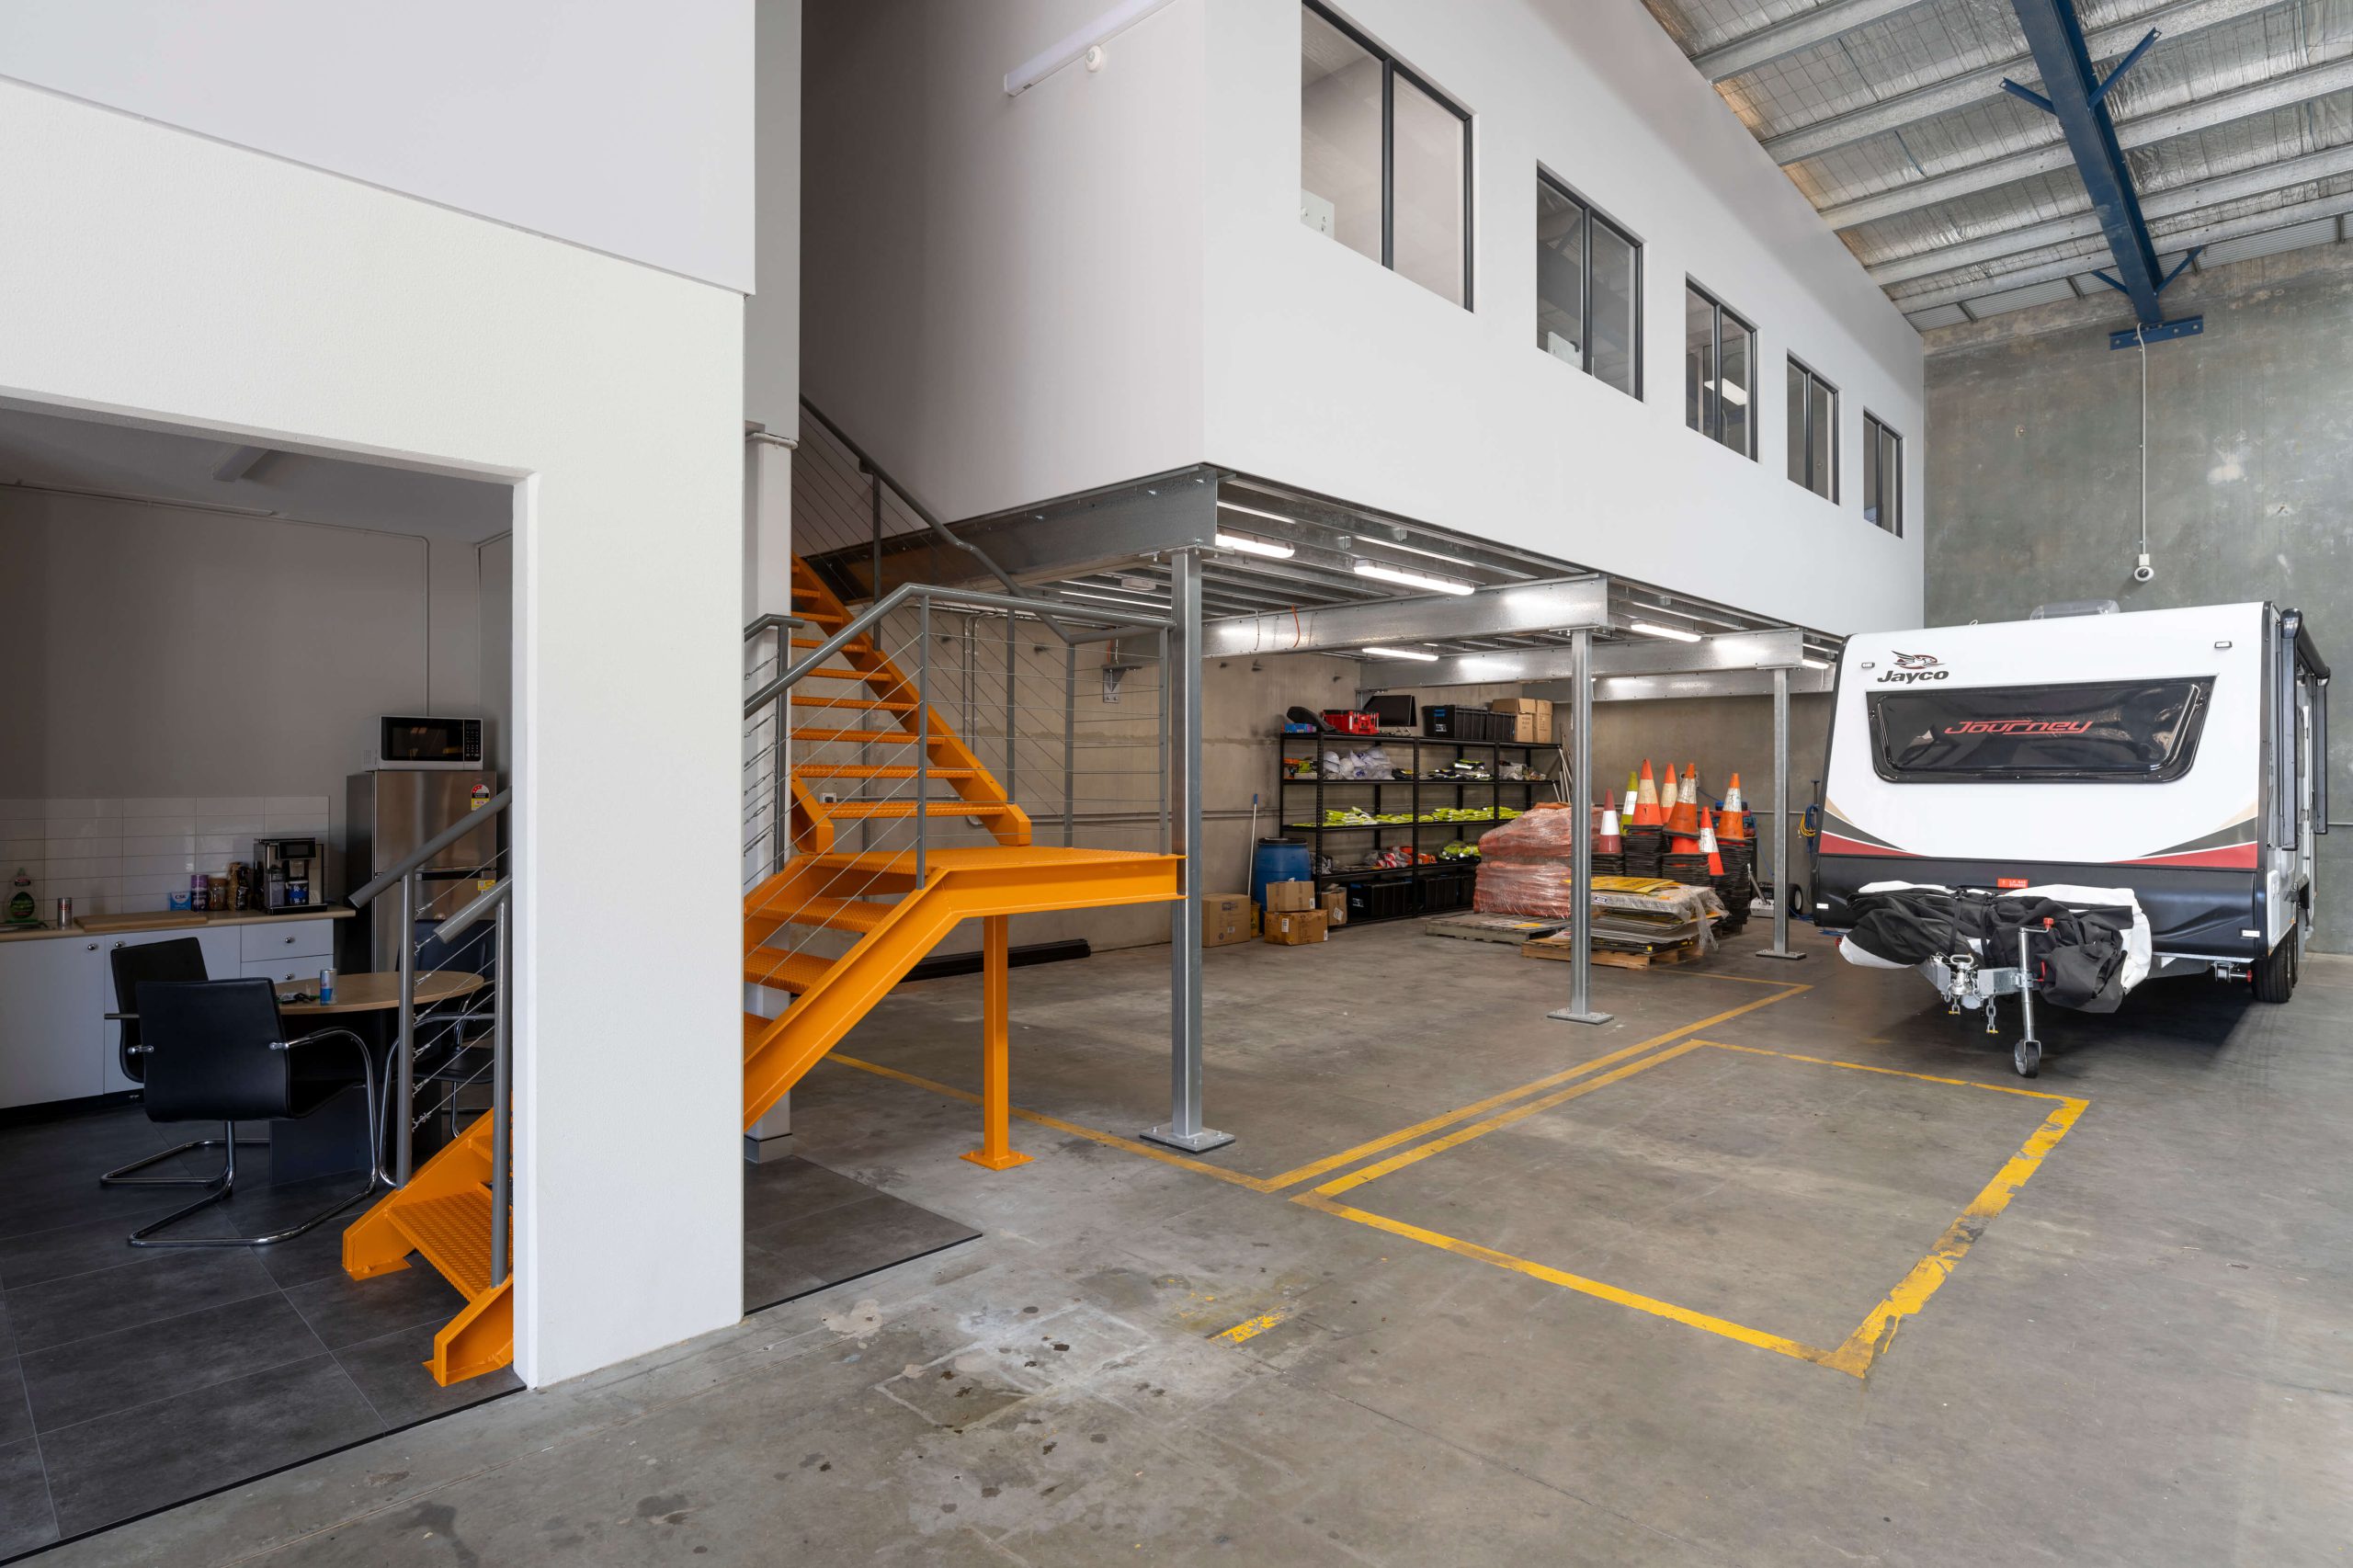 Mezzanine designed and installed for Direct Traffic by Heighton